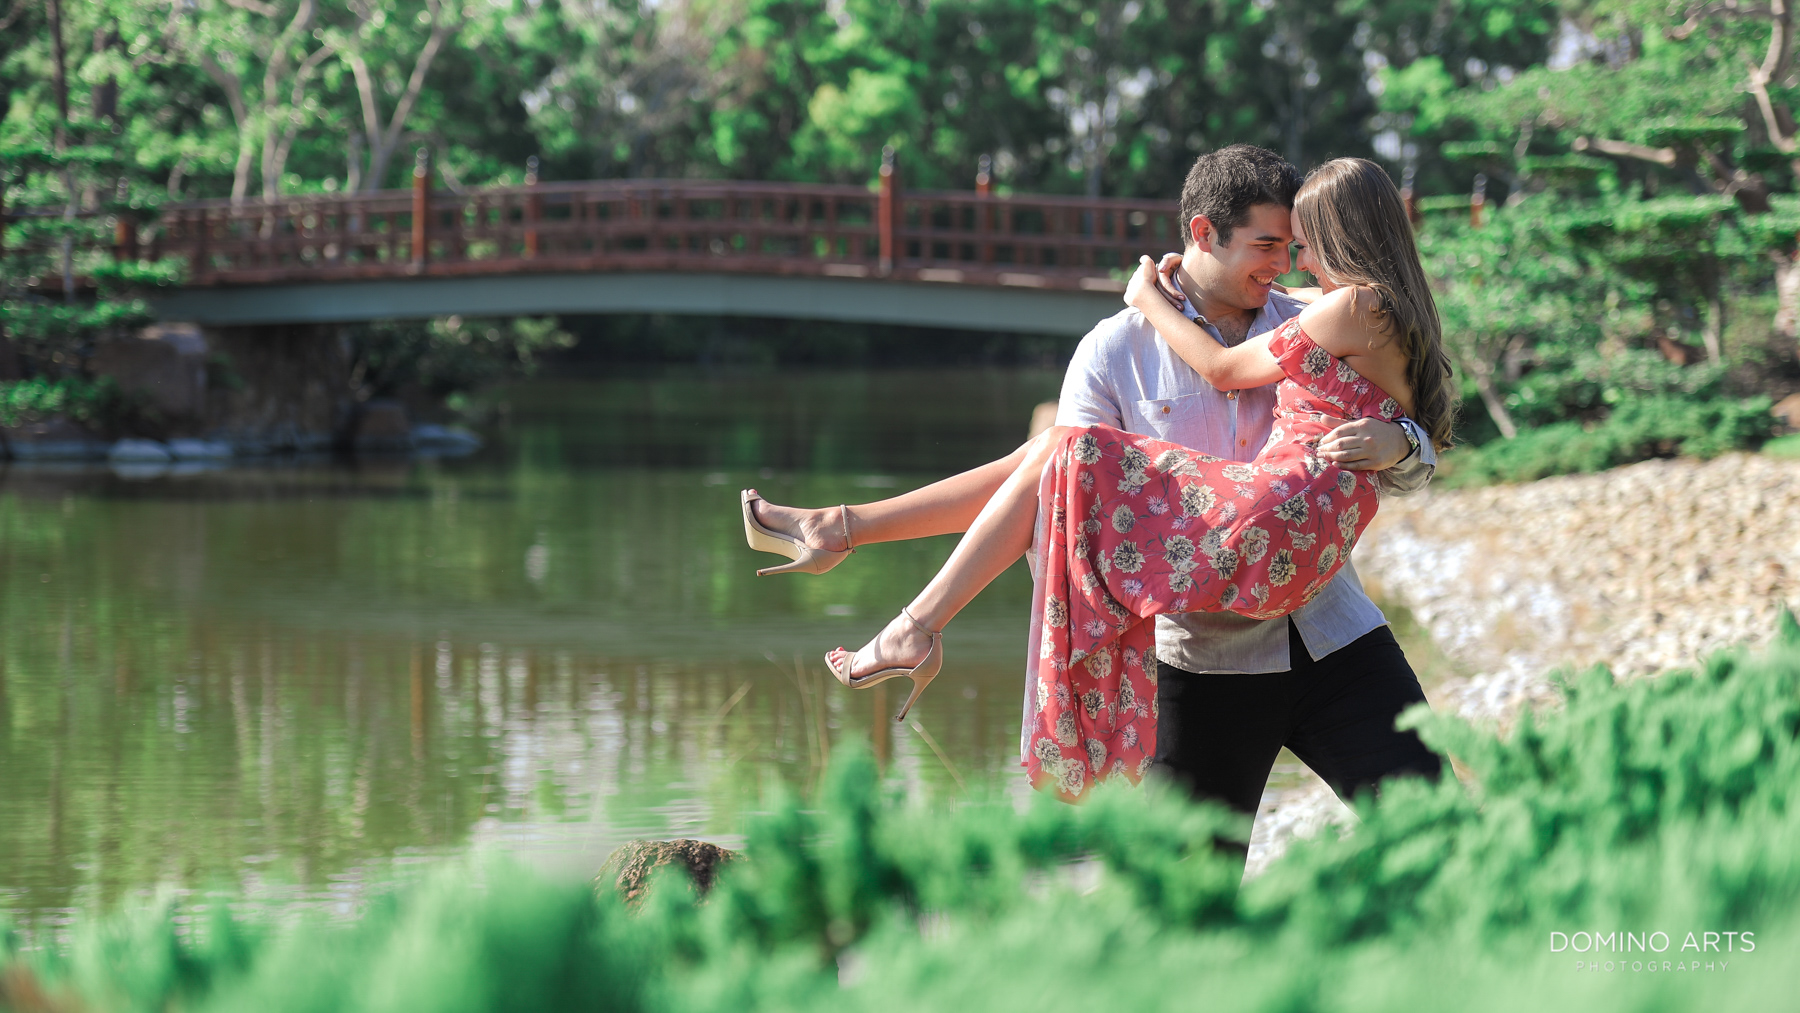 Romantic Outdoor Engagement Photography at Morikami Museum and Japanese Gardens